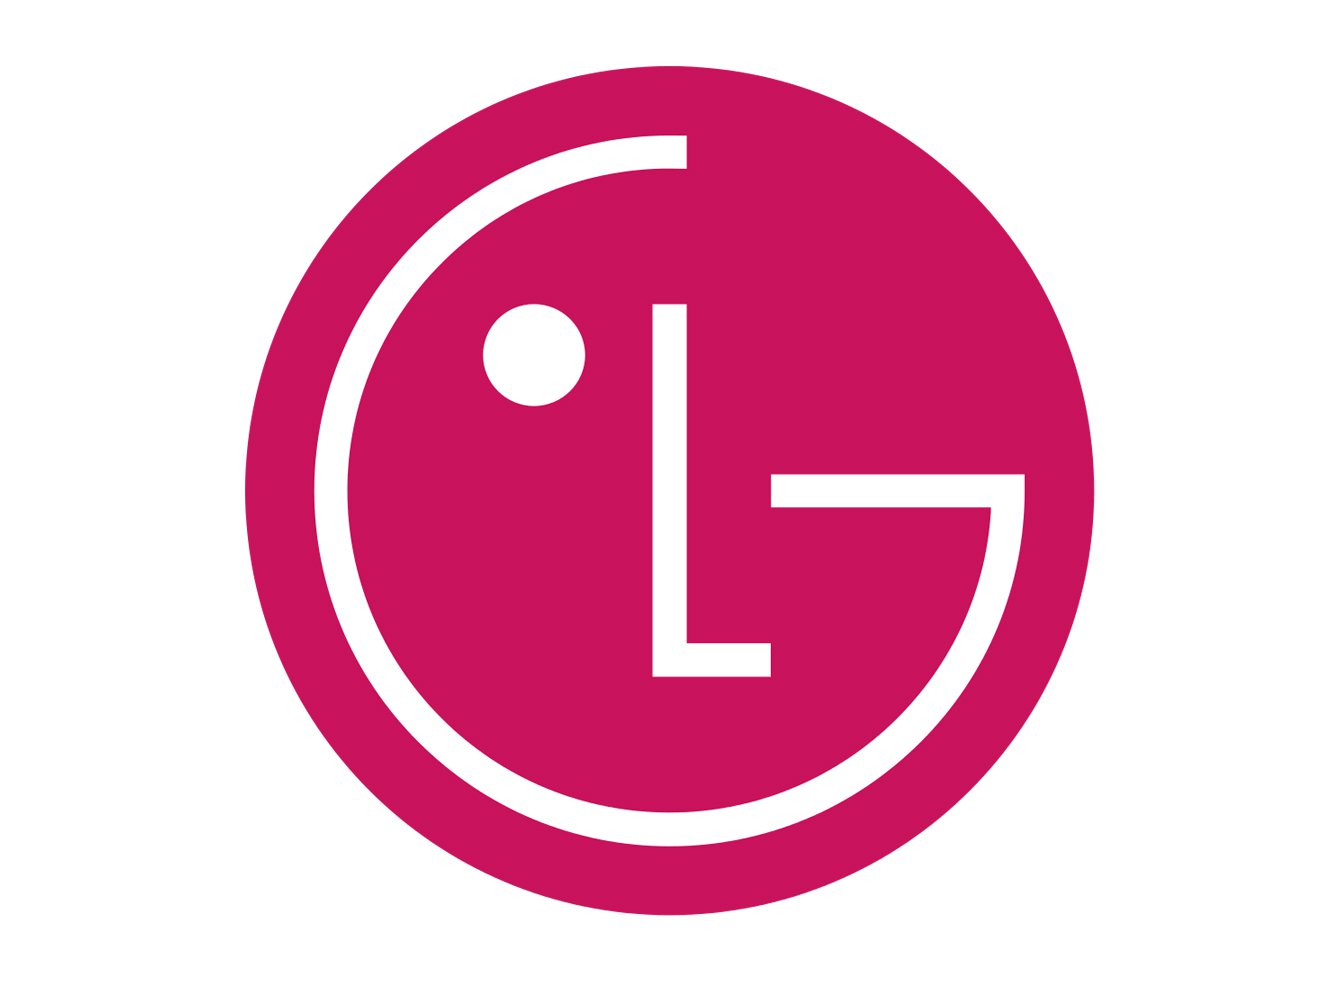  LG Logo Symbol Meaning History And Evolution